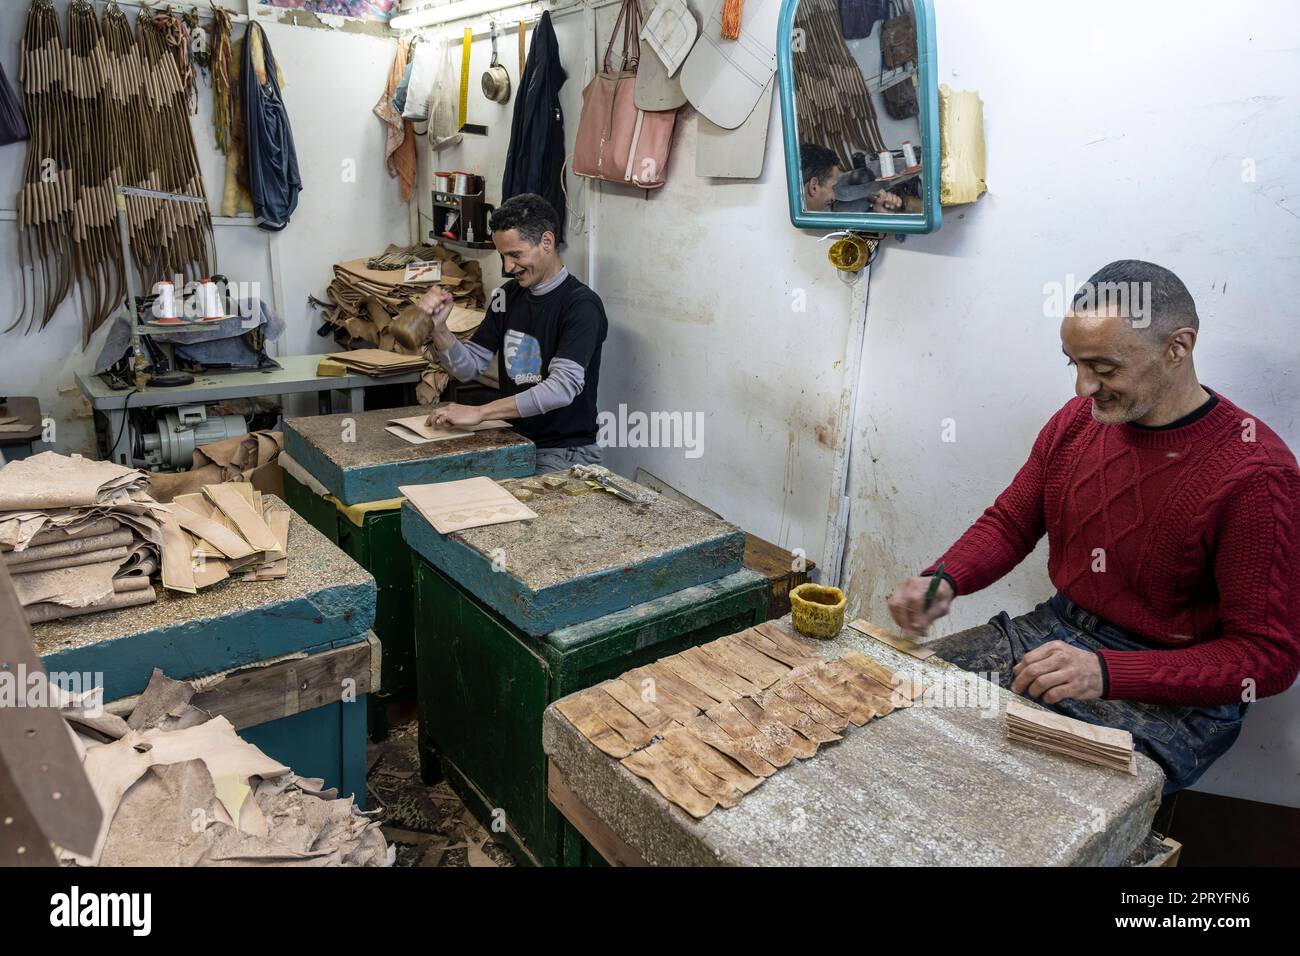 Craftsmen working leather in a small workshop in the Tetouan medina. Stock Photo